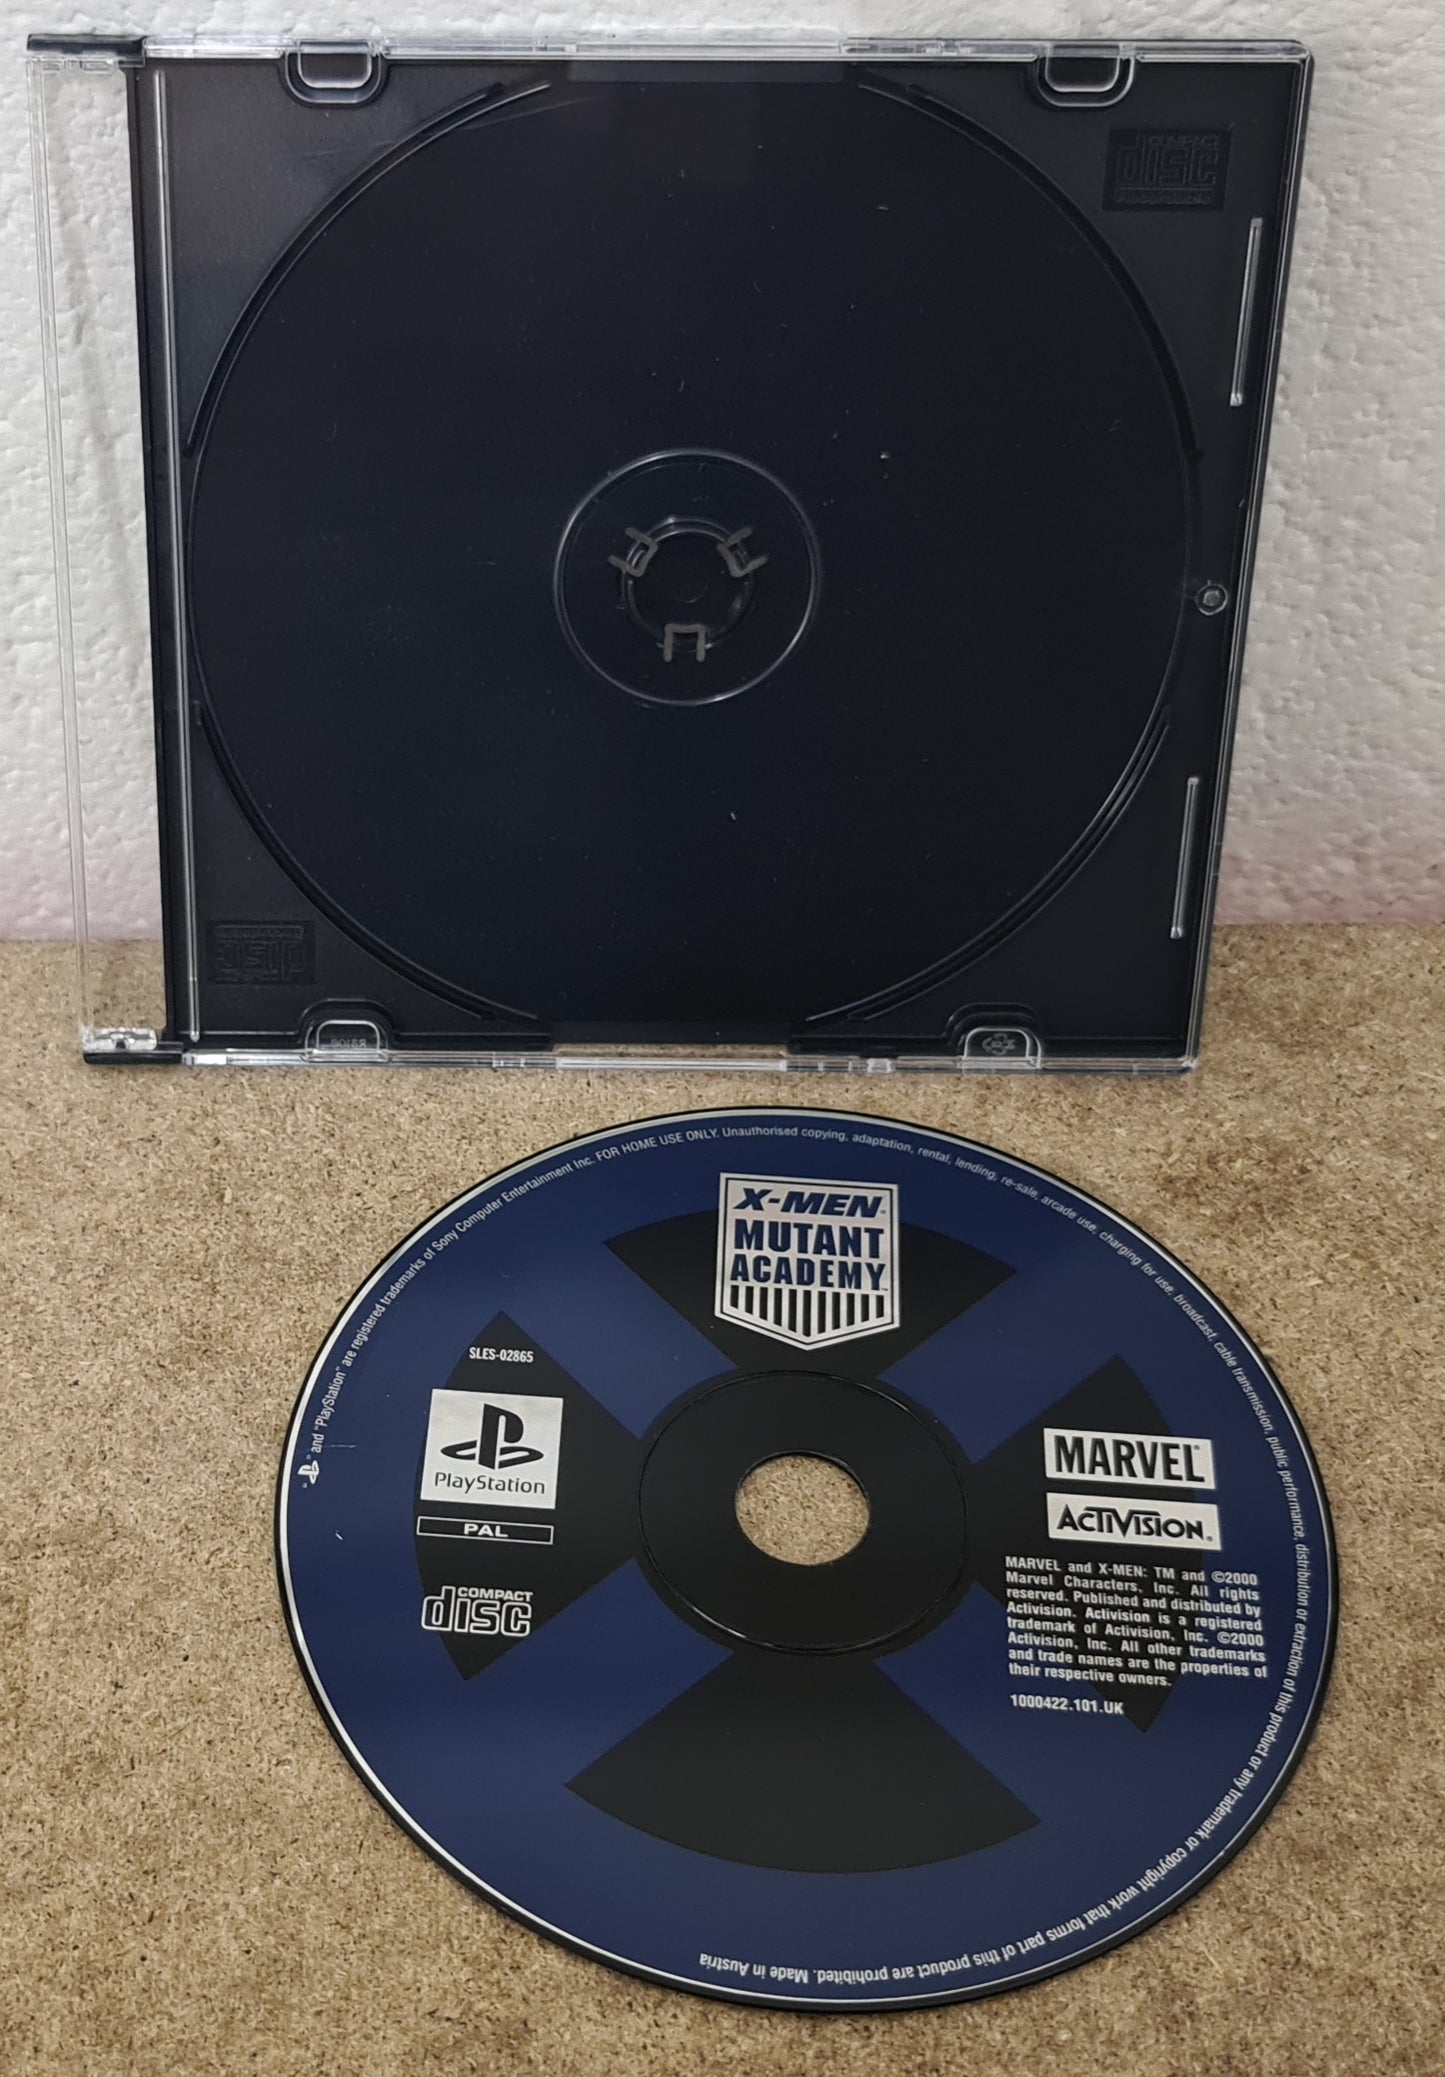 X-Men Mutant Academy Sony Playstation 1 (PS1) Game Disc Only